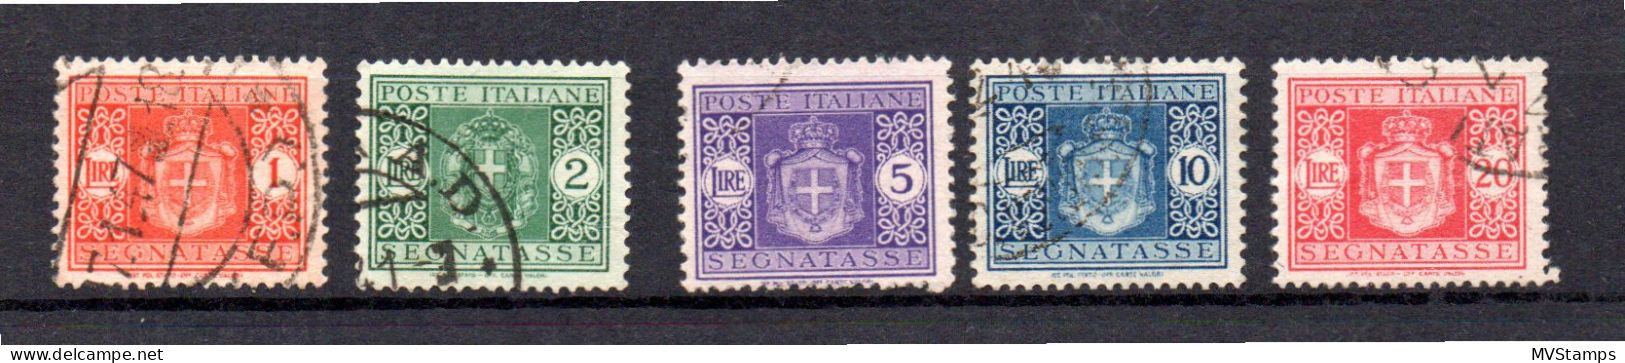 Italy 1945 Set Postage-Due Stamps (Michel P 69/73) Used - Postage Due